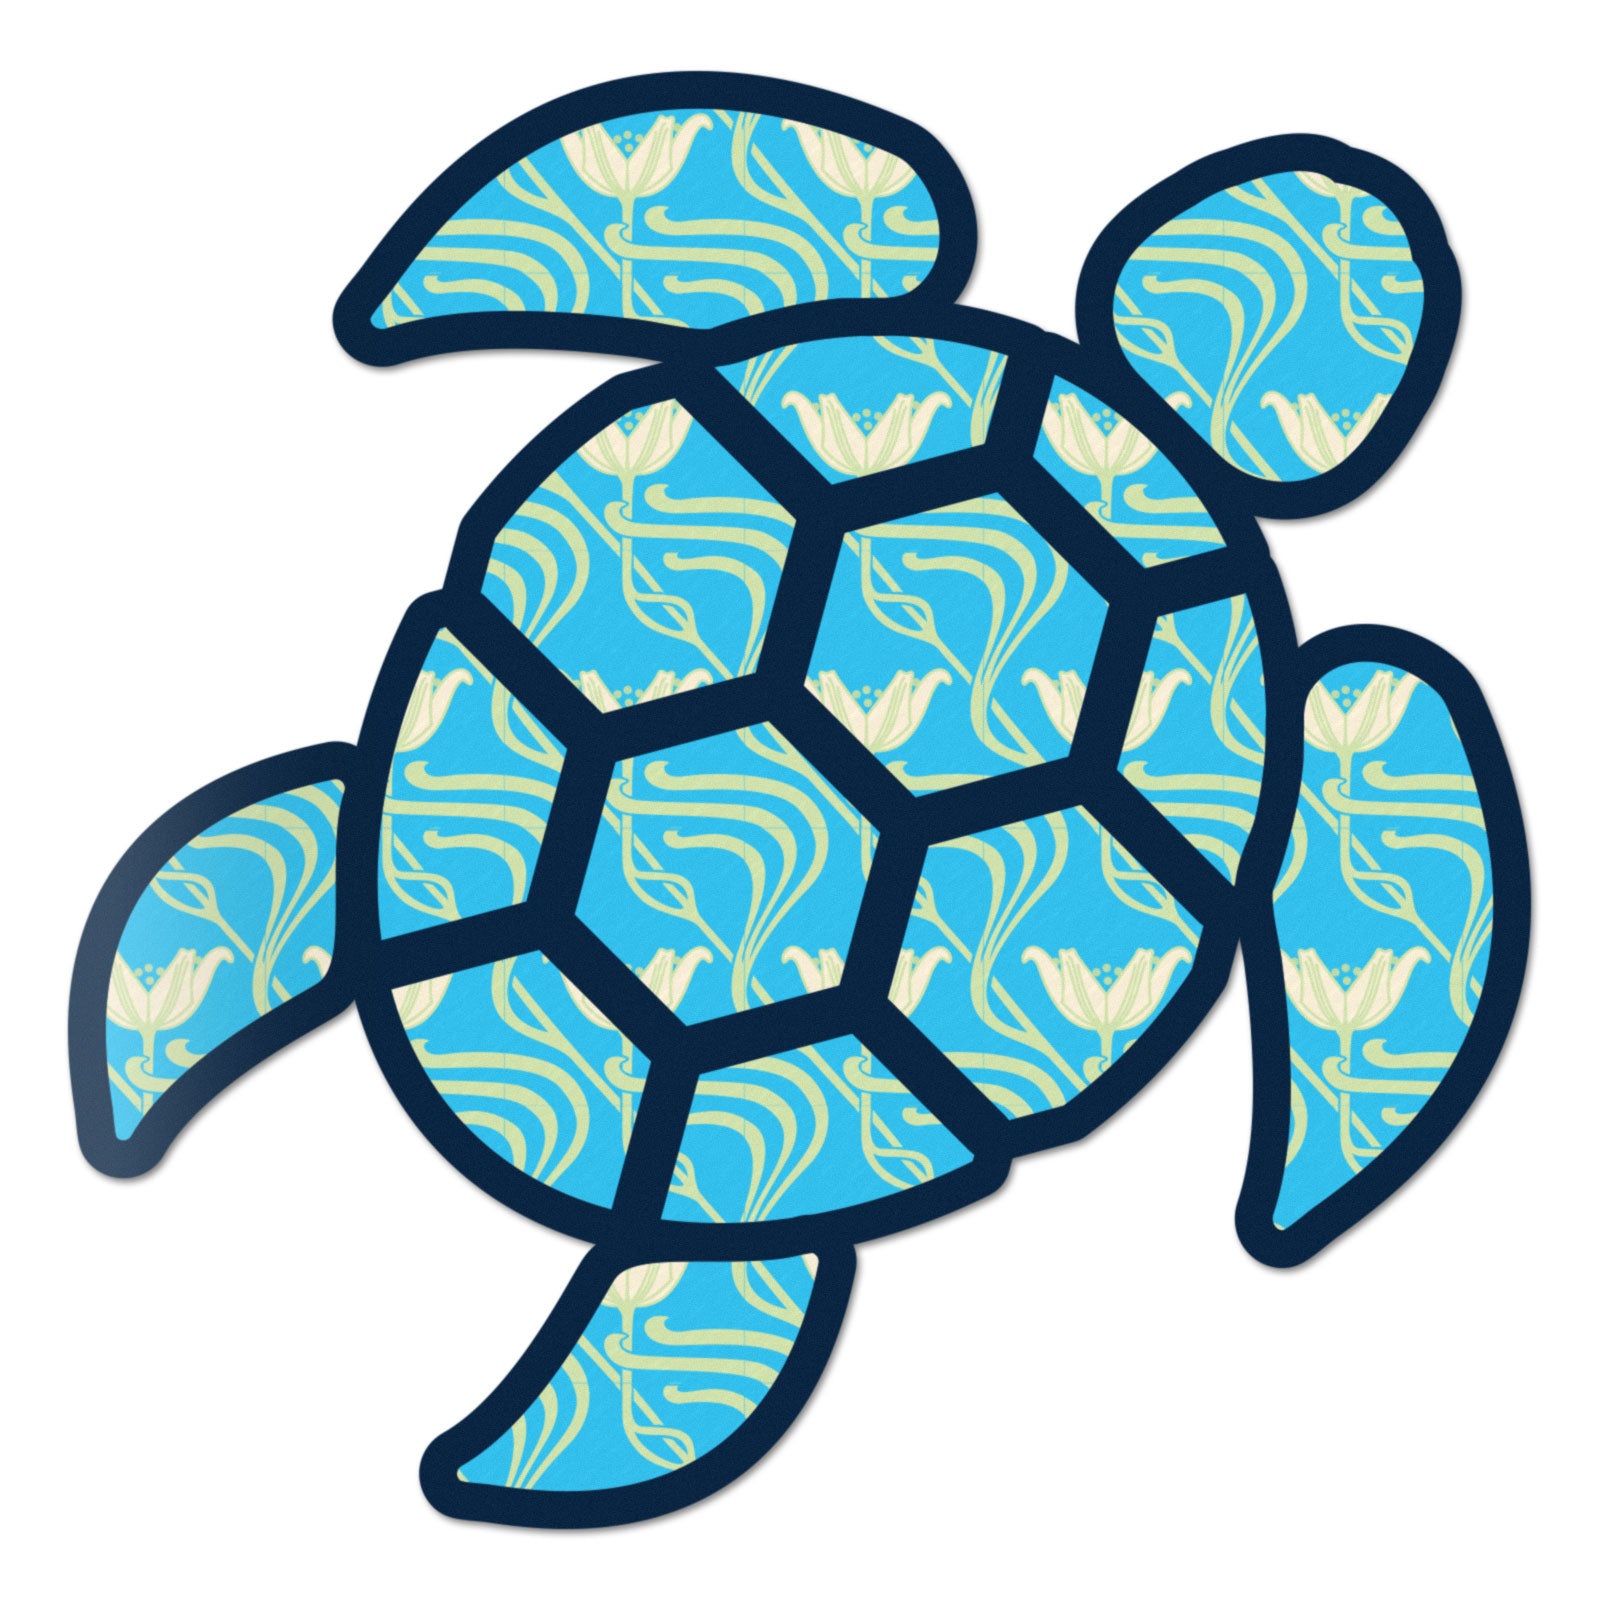 Red Hound Auto Sea Turtle Aqua Flower Sticker Decal Wall Tumbler Cup Window Car Truck Laptop 2.5 Inches